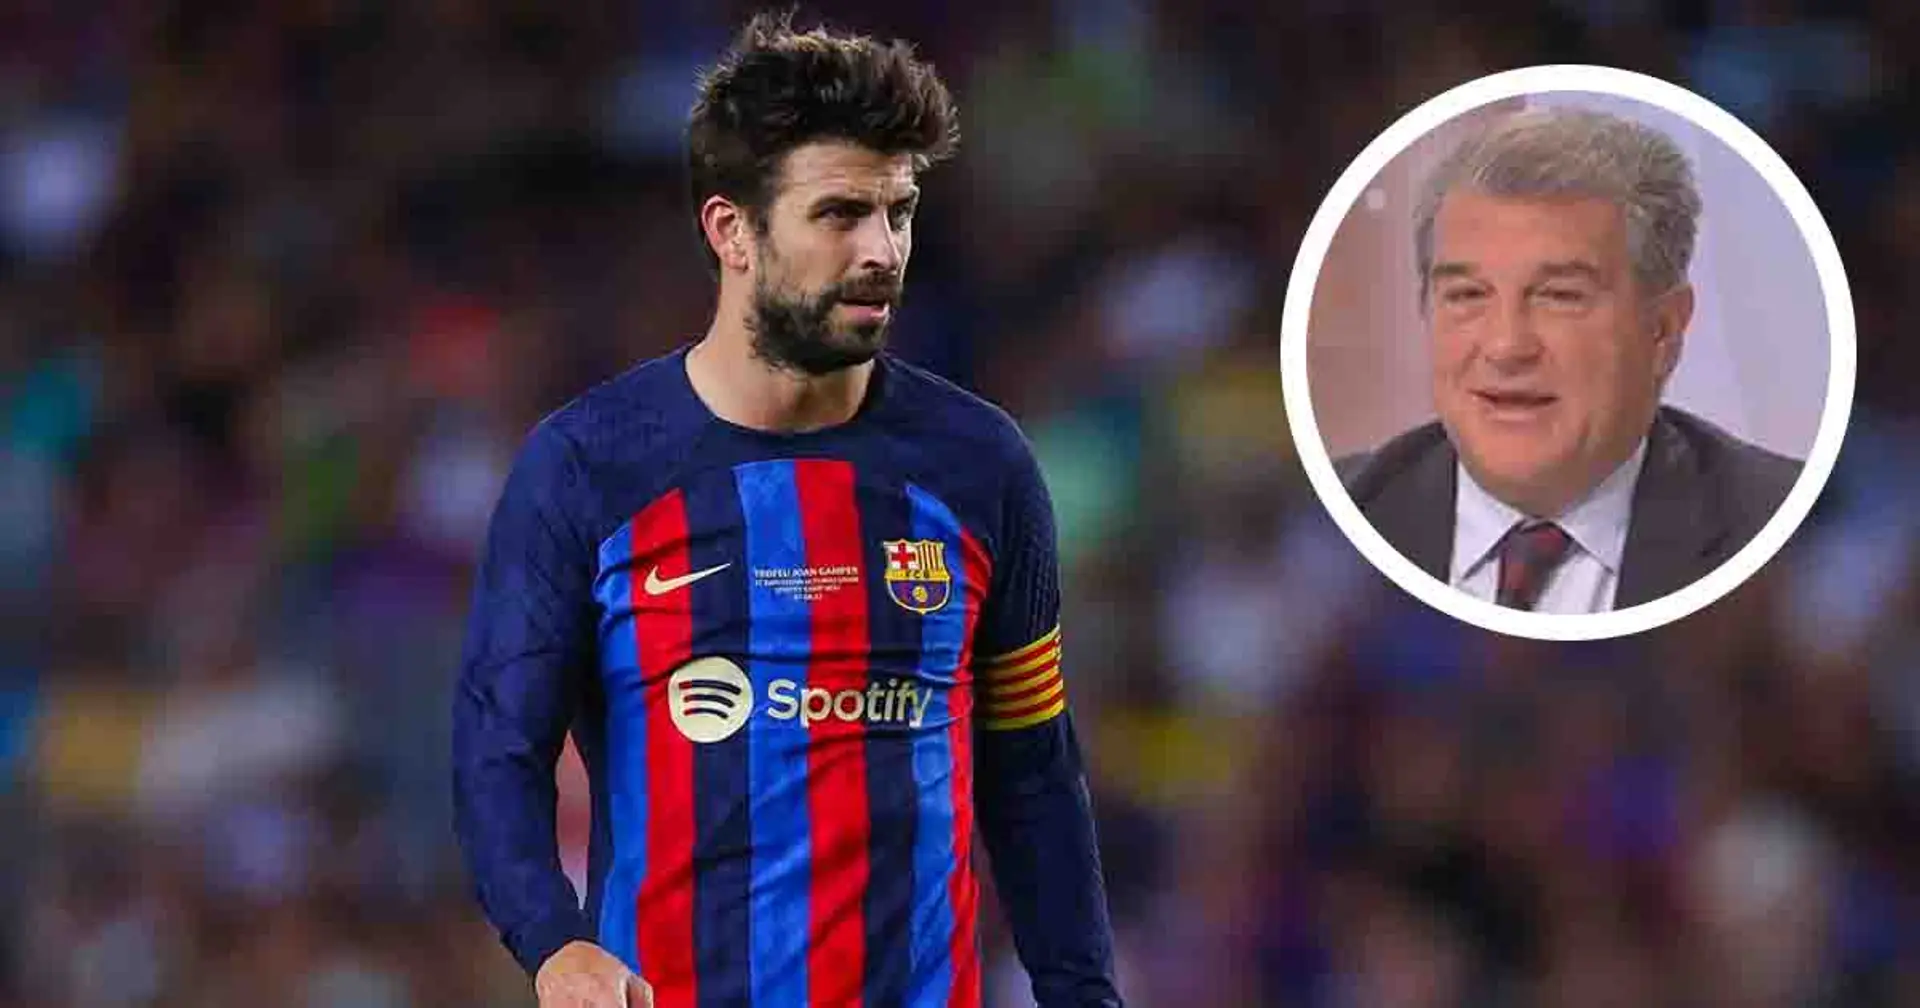 Will Pique be allowed to take part in Barca's La Liga title celebrations? Laporta answers